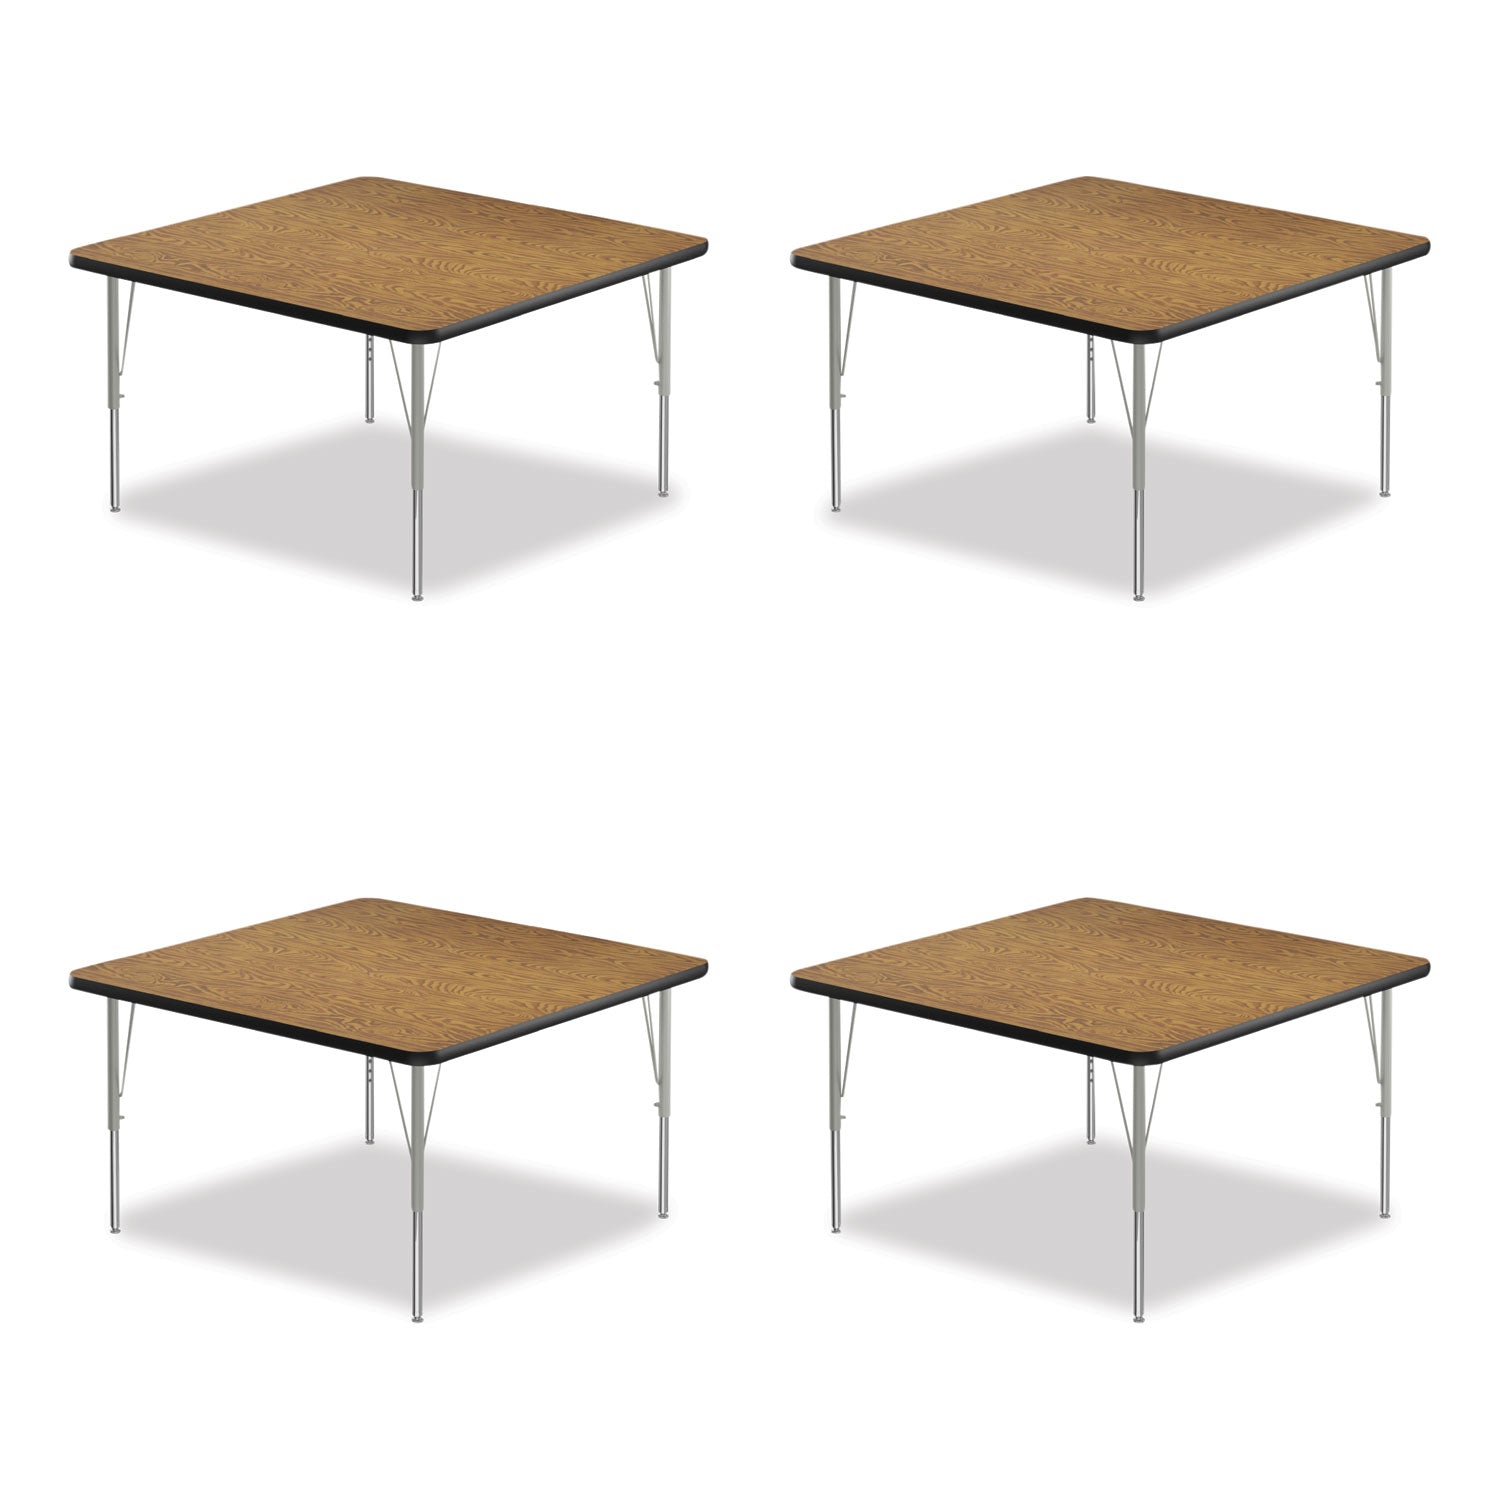 adjustable-activity-tables-square-48-x-48-x-19-to-29-medium-oak-top-silver-legs-4-pallet-ships-in-4-6-business-days_crl4848tf06954p - 1